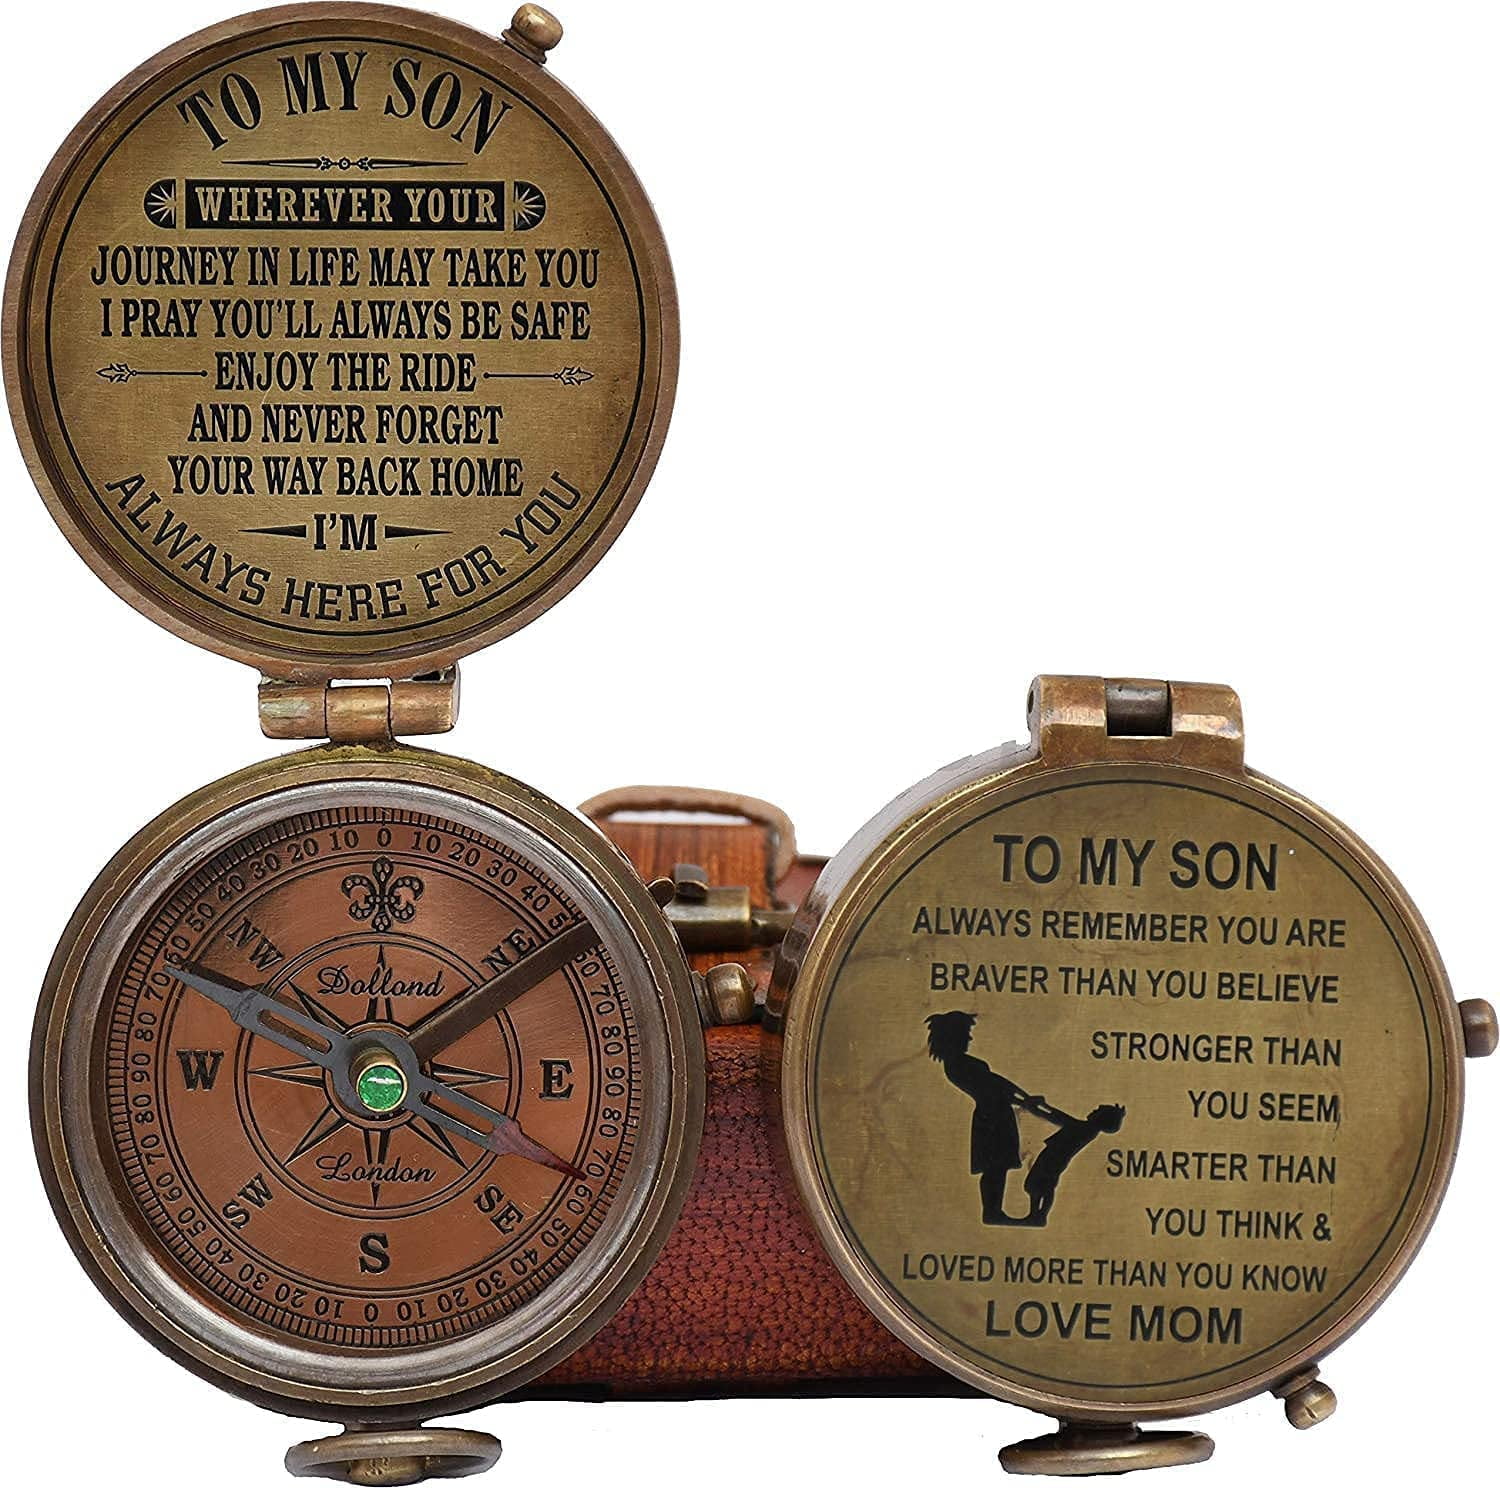 Brass Compass With Case/ "To My Son" Father to Son Gifts/Mother to Son Gift 